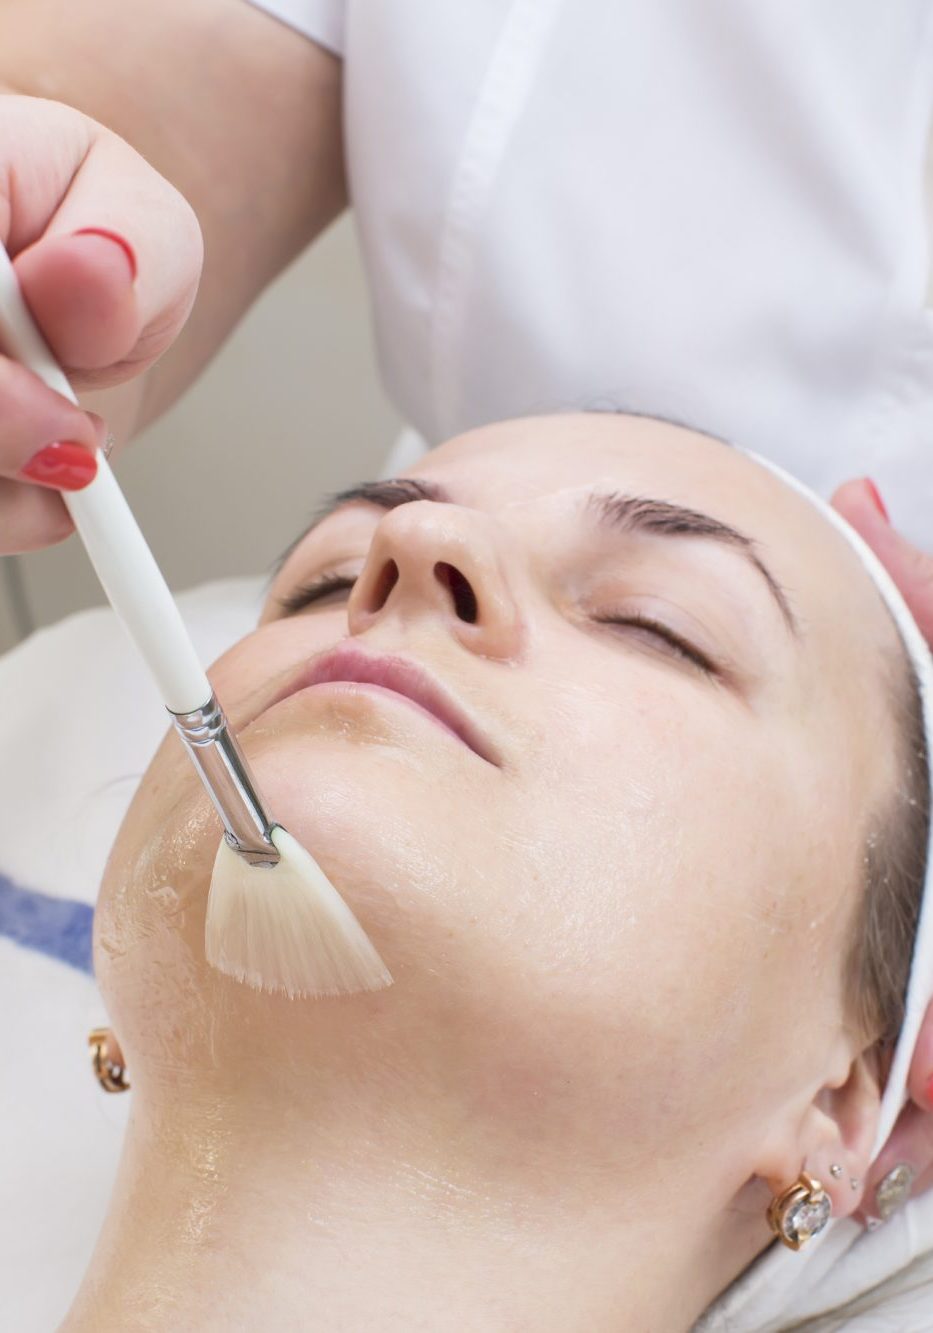 A chemical peel is a technique used to improve and smooth the texture of the skin. Facial skin is mostly treated, and scarring and pigmentations can be improved. Chemical peels are intended to remove the outermost layers of the skin which leave your skin looking fresh and glowing